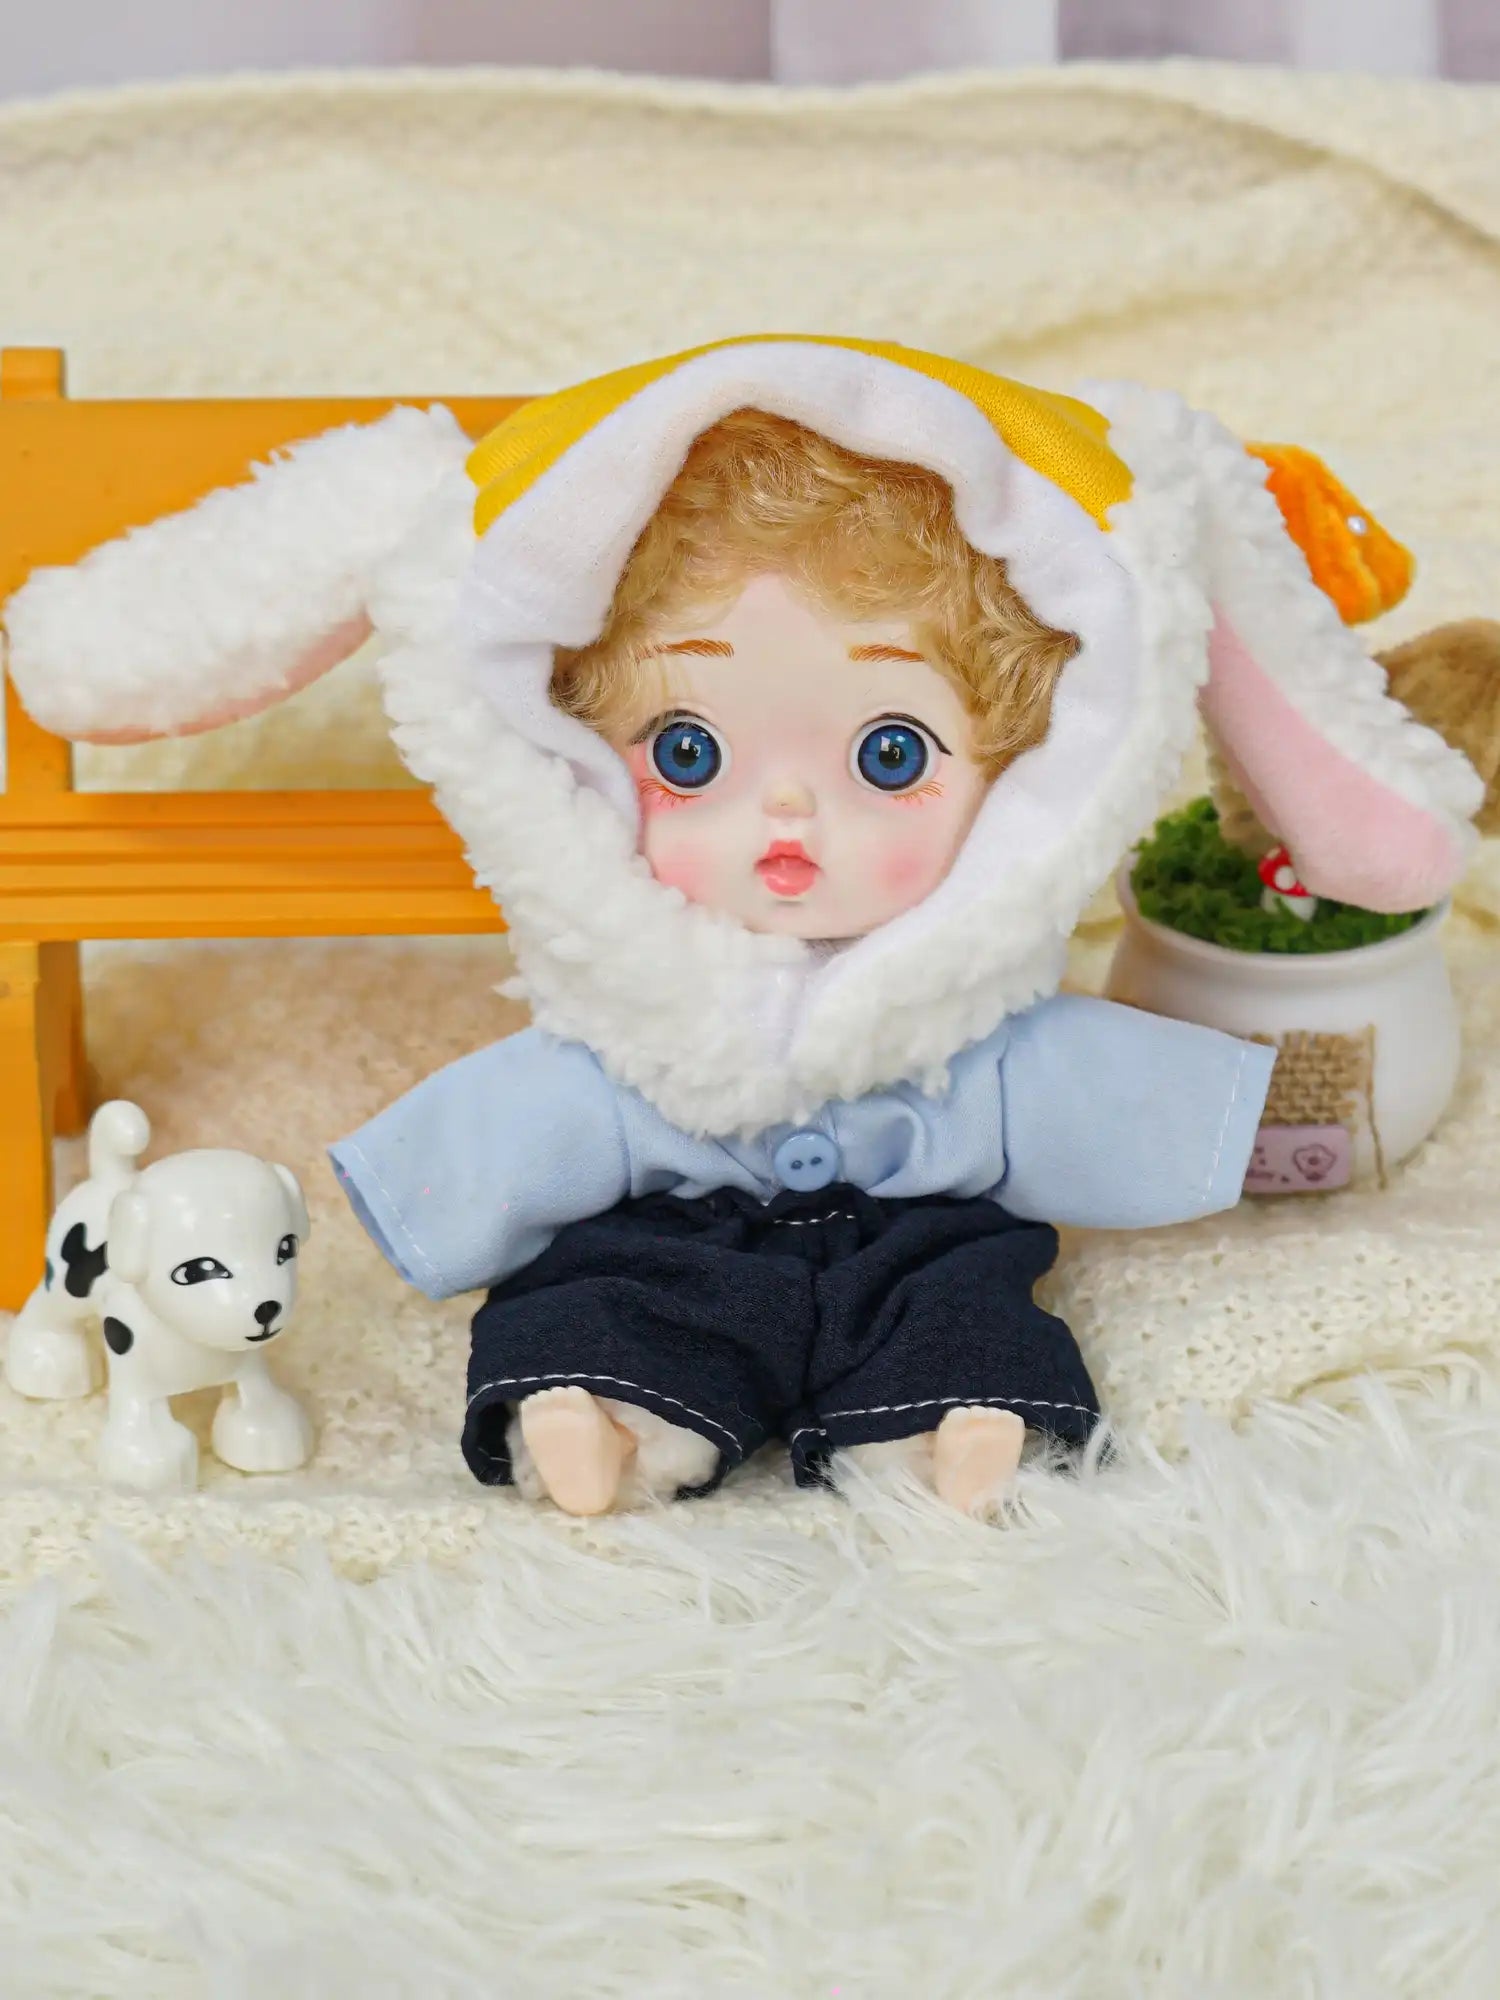 A blue-eyed doll with soft curly hair and a white lamb hood, accompanied by a miniature dog and cheerful ornaments.